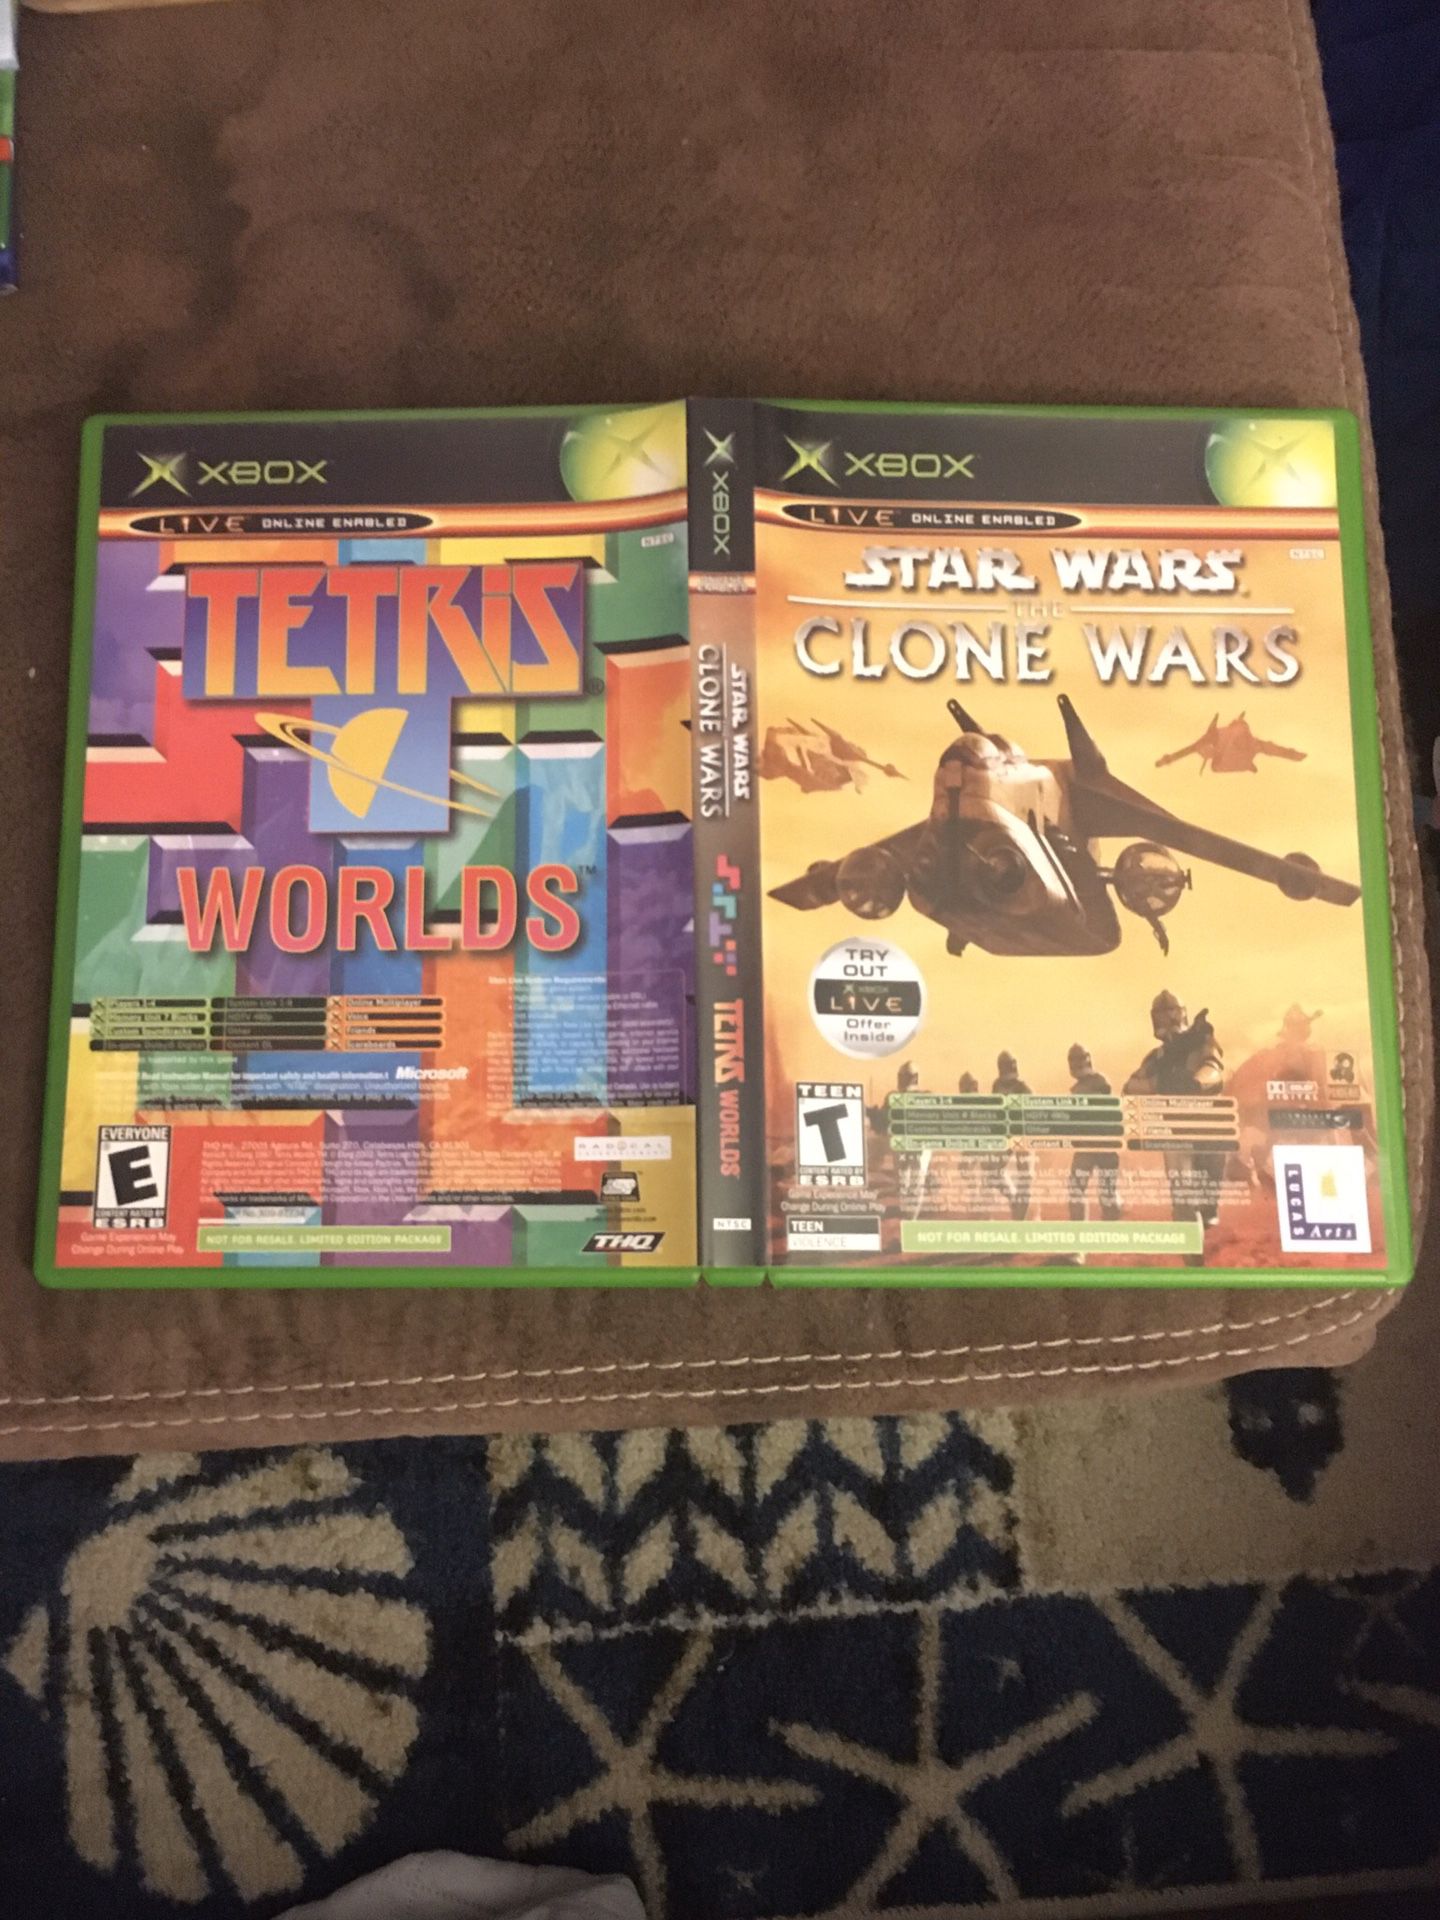 Xbox Star Wars The Clone Wars and Tetris Worlds Combo